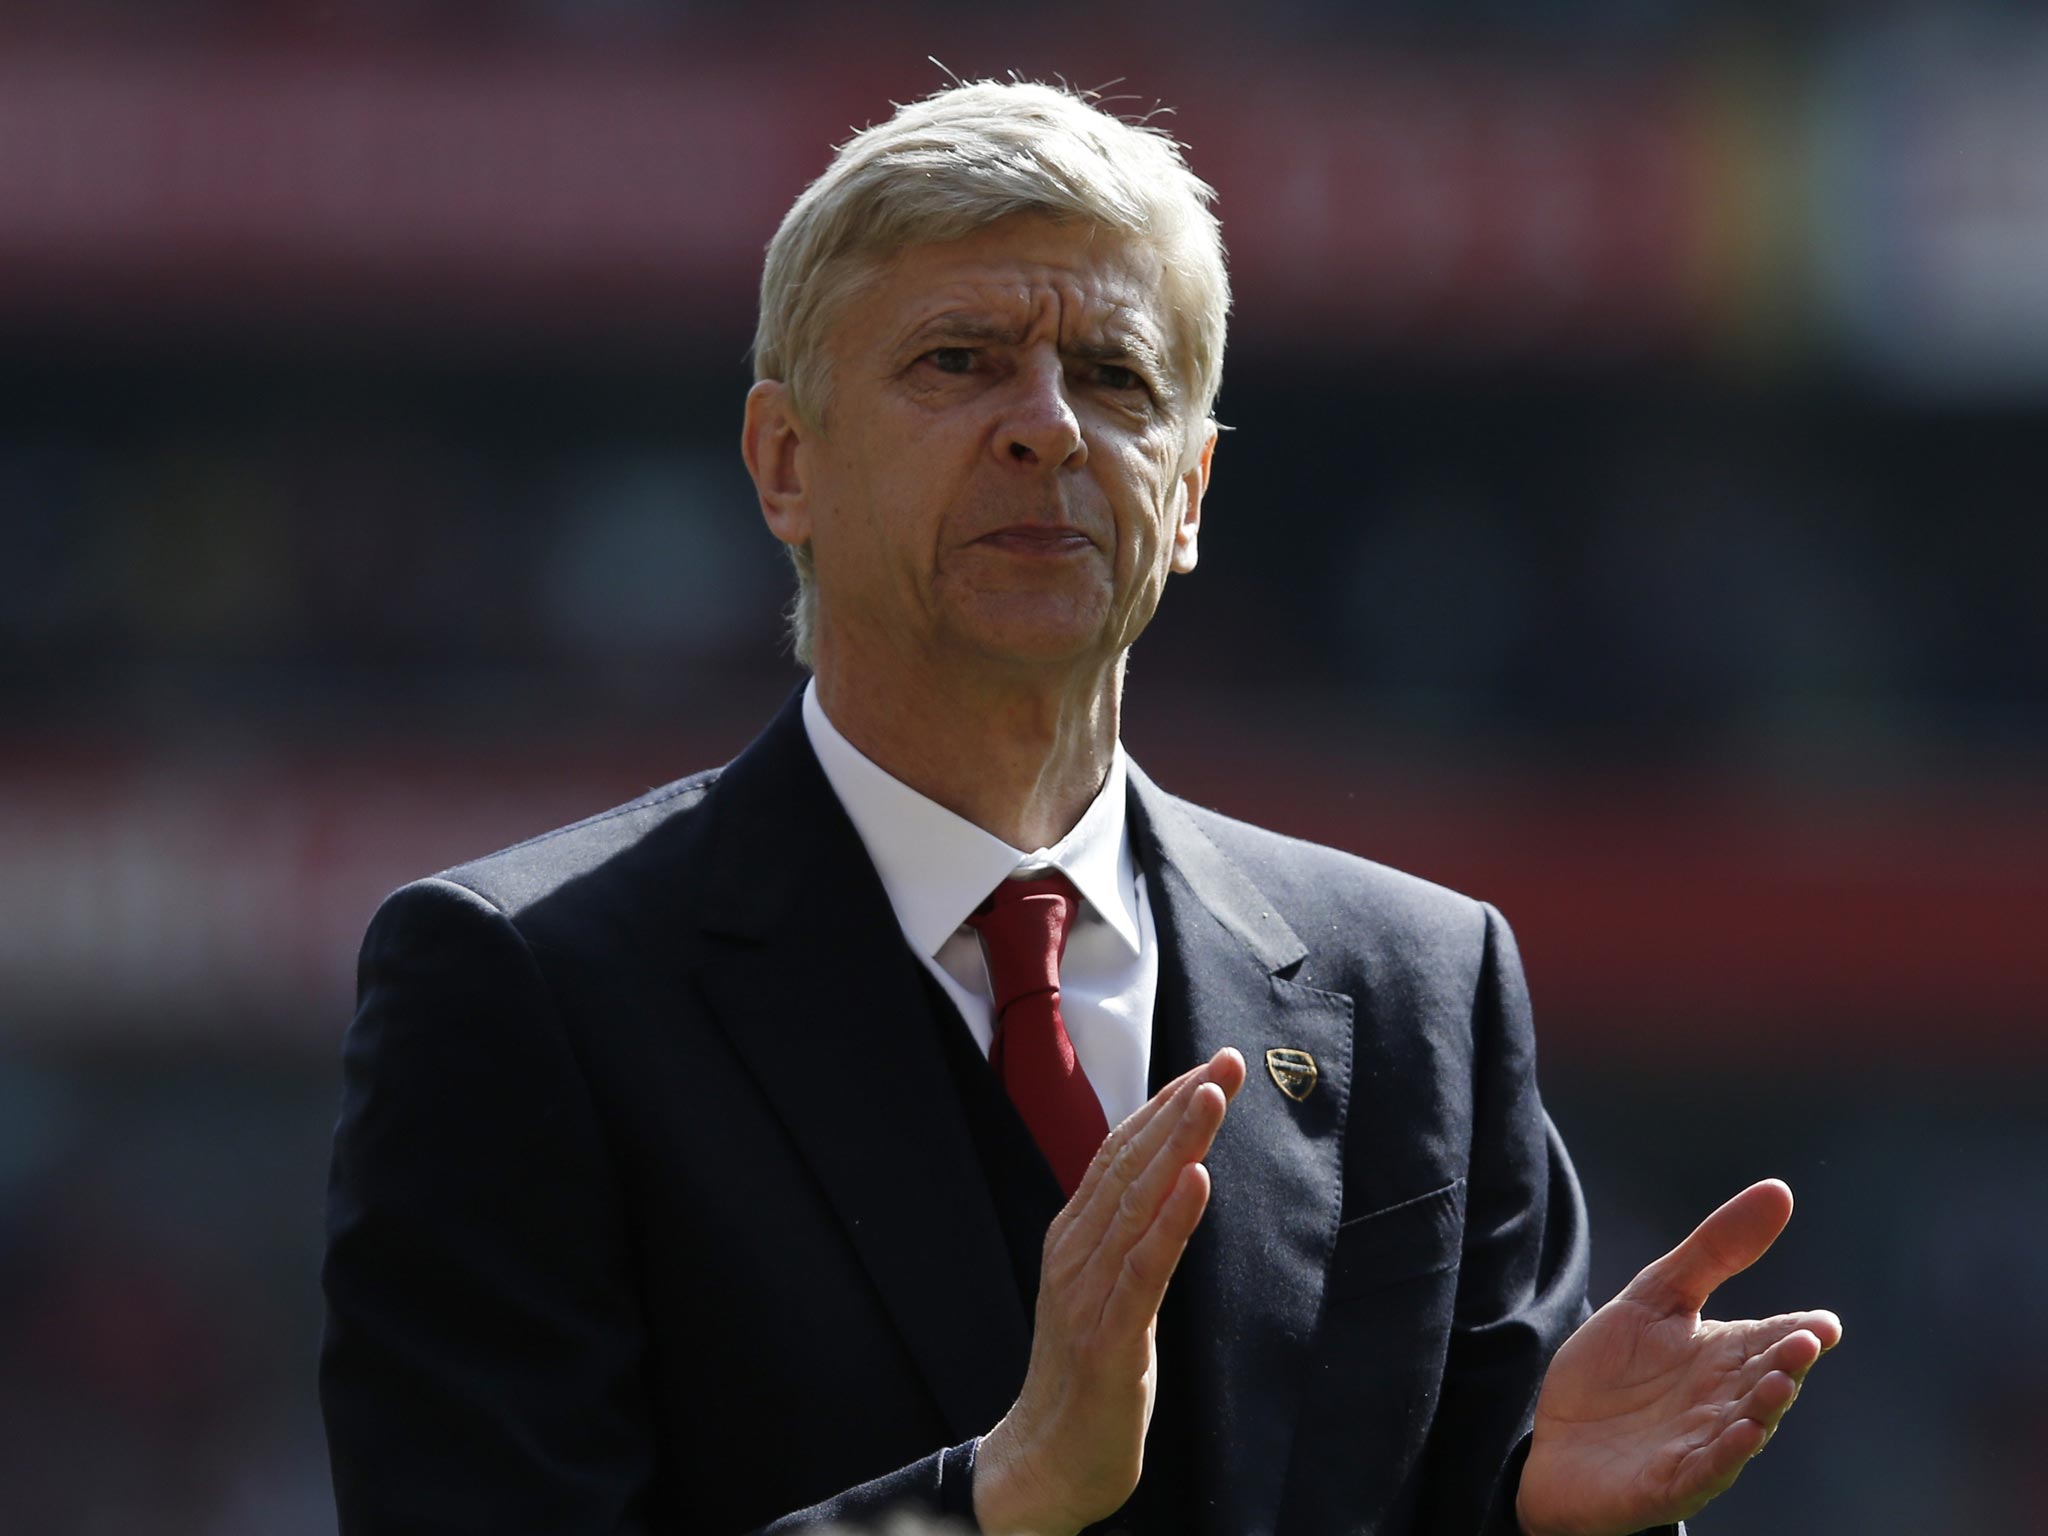 Arsene Wenger believes his squad need 'hard work' and not big signings to challenge for next season's Premier League